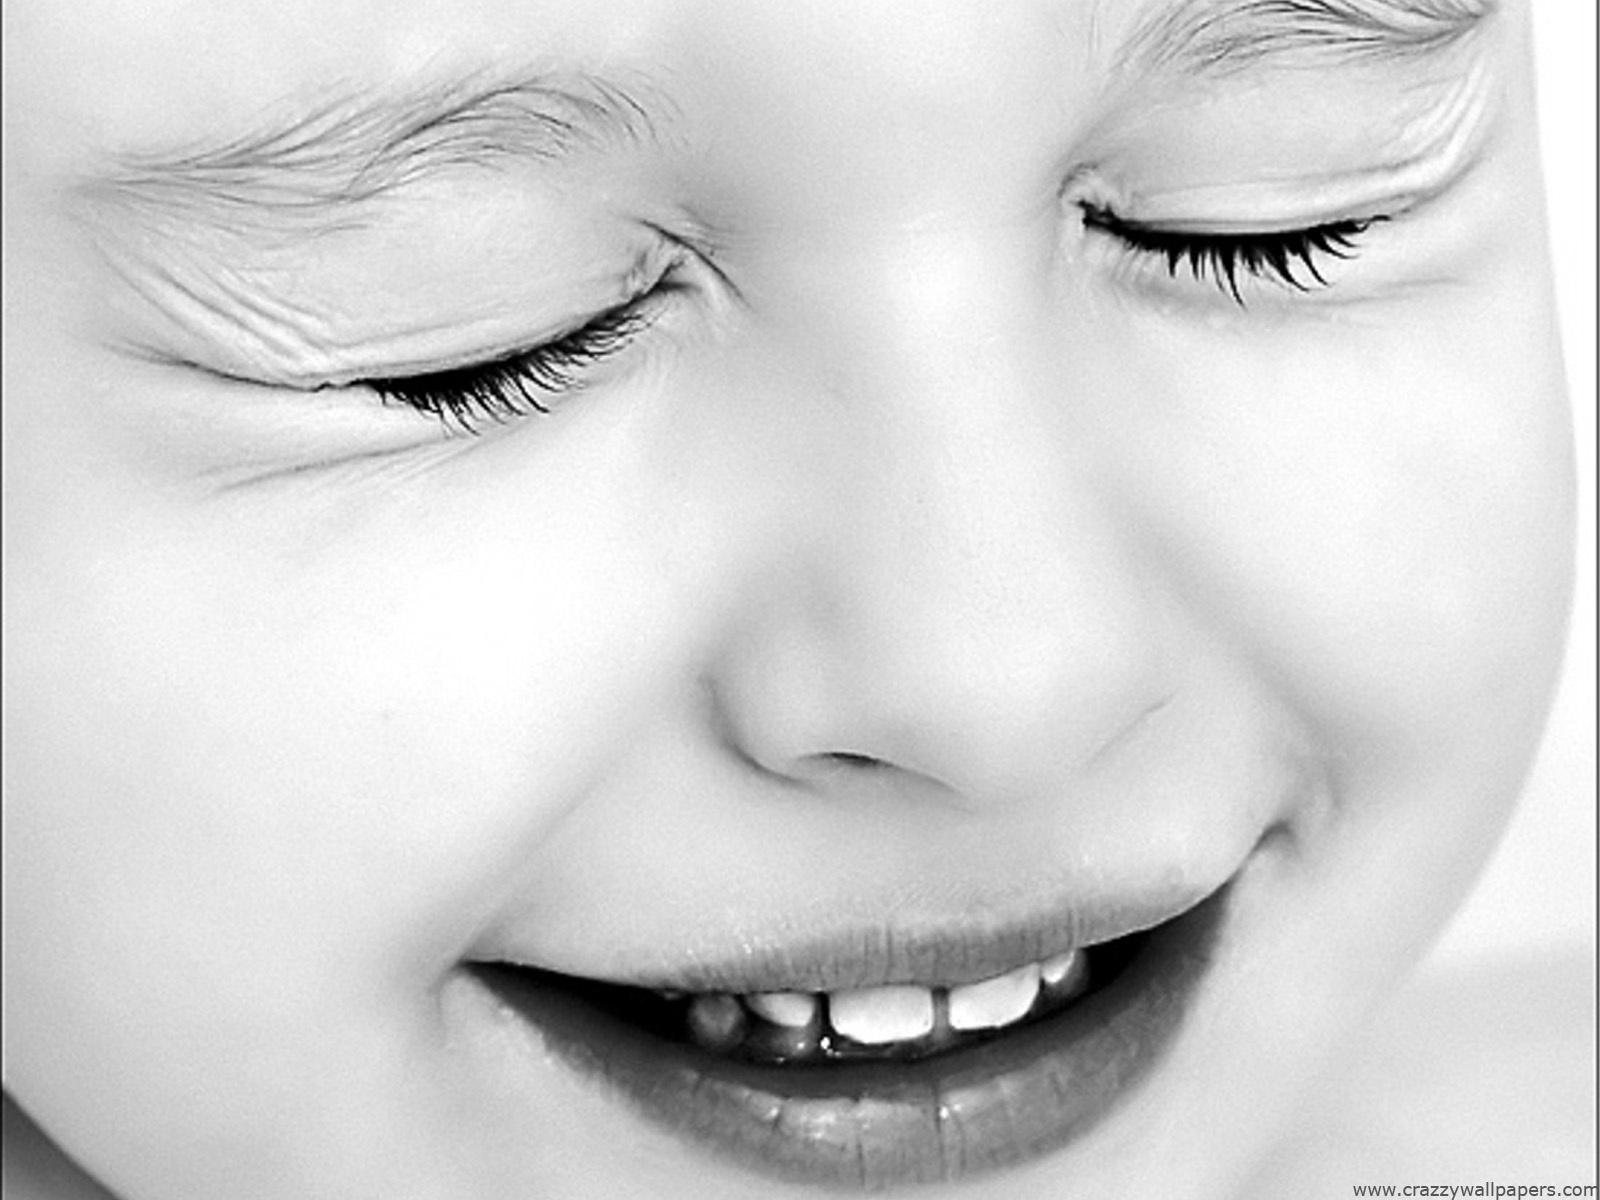 Cute baby black and white Wallpaper in jpg format for free download